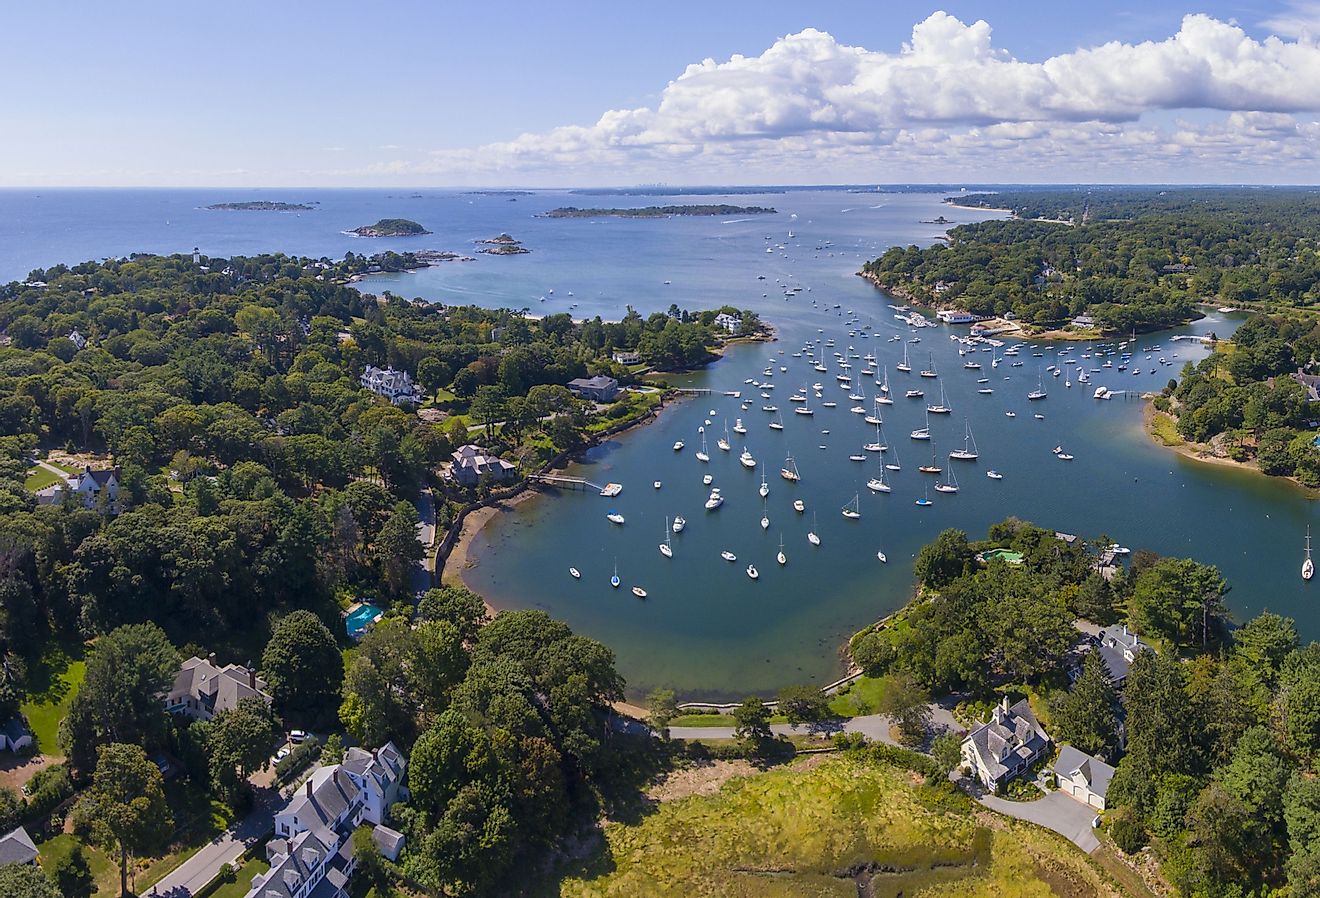 Aerial view of Manchester Marina and harbor panorama, Manchester by the sea, Cape Ann, Massachusetts